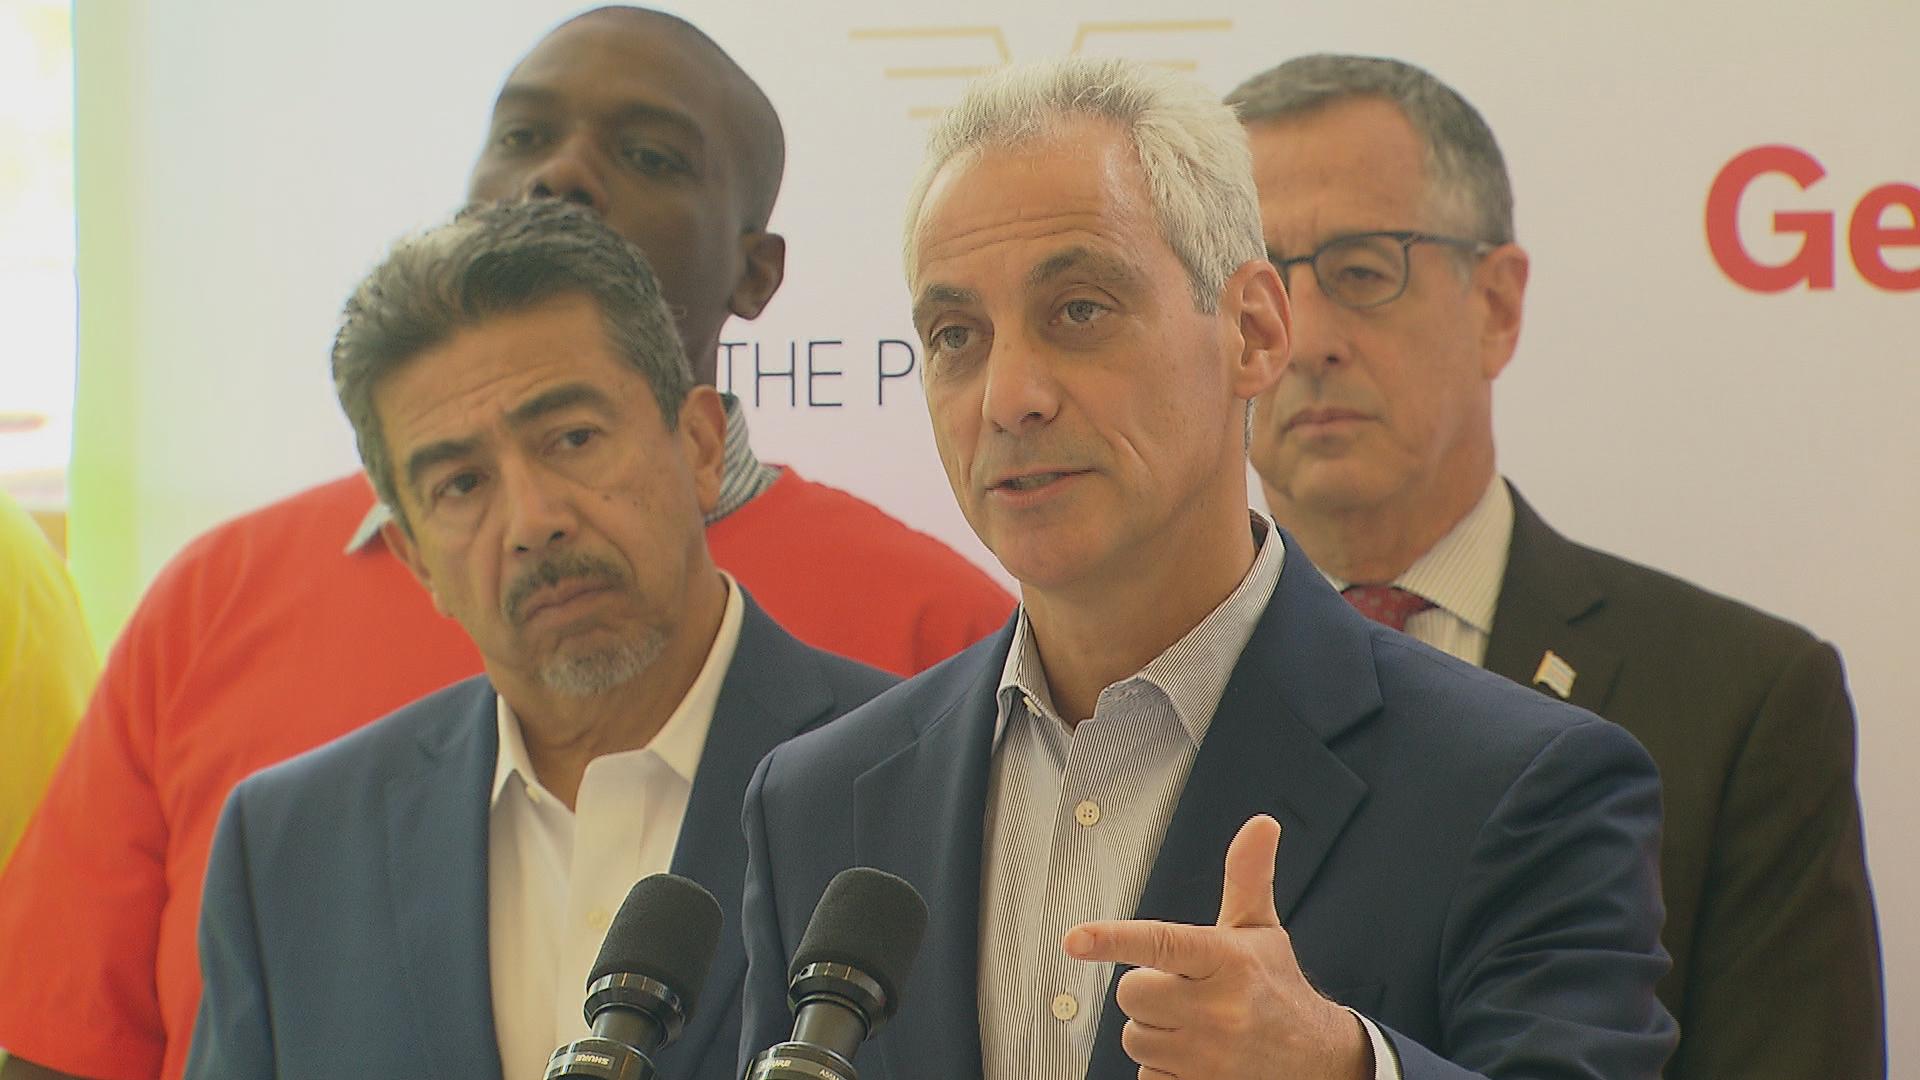 Amazon wants “to be ready for business on day one,” said Mayor Rahm Emanuel.